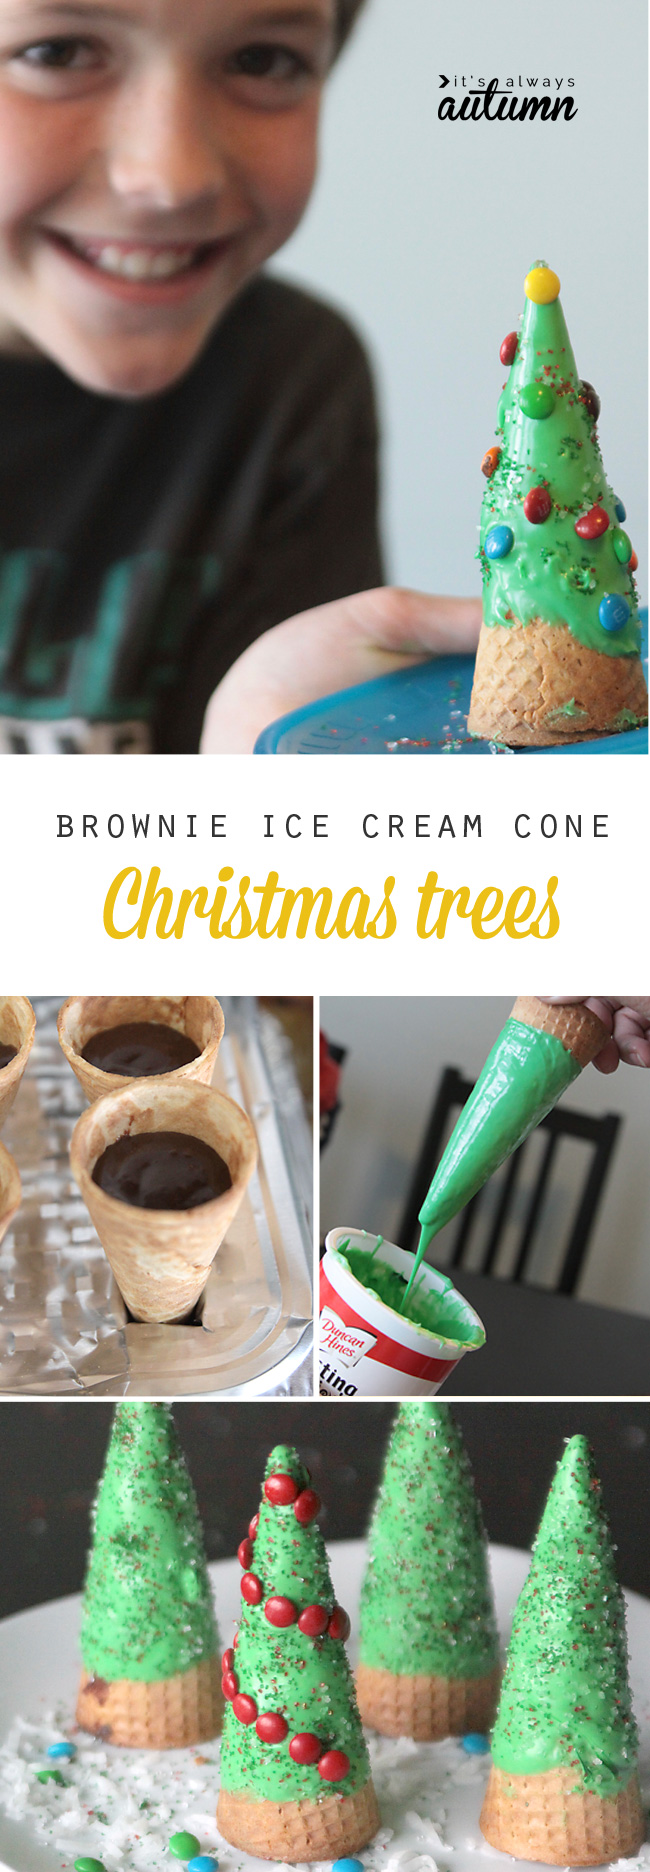 brownie stuffed Christmas trees & a giveaway! - It's Always Autumn